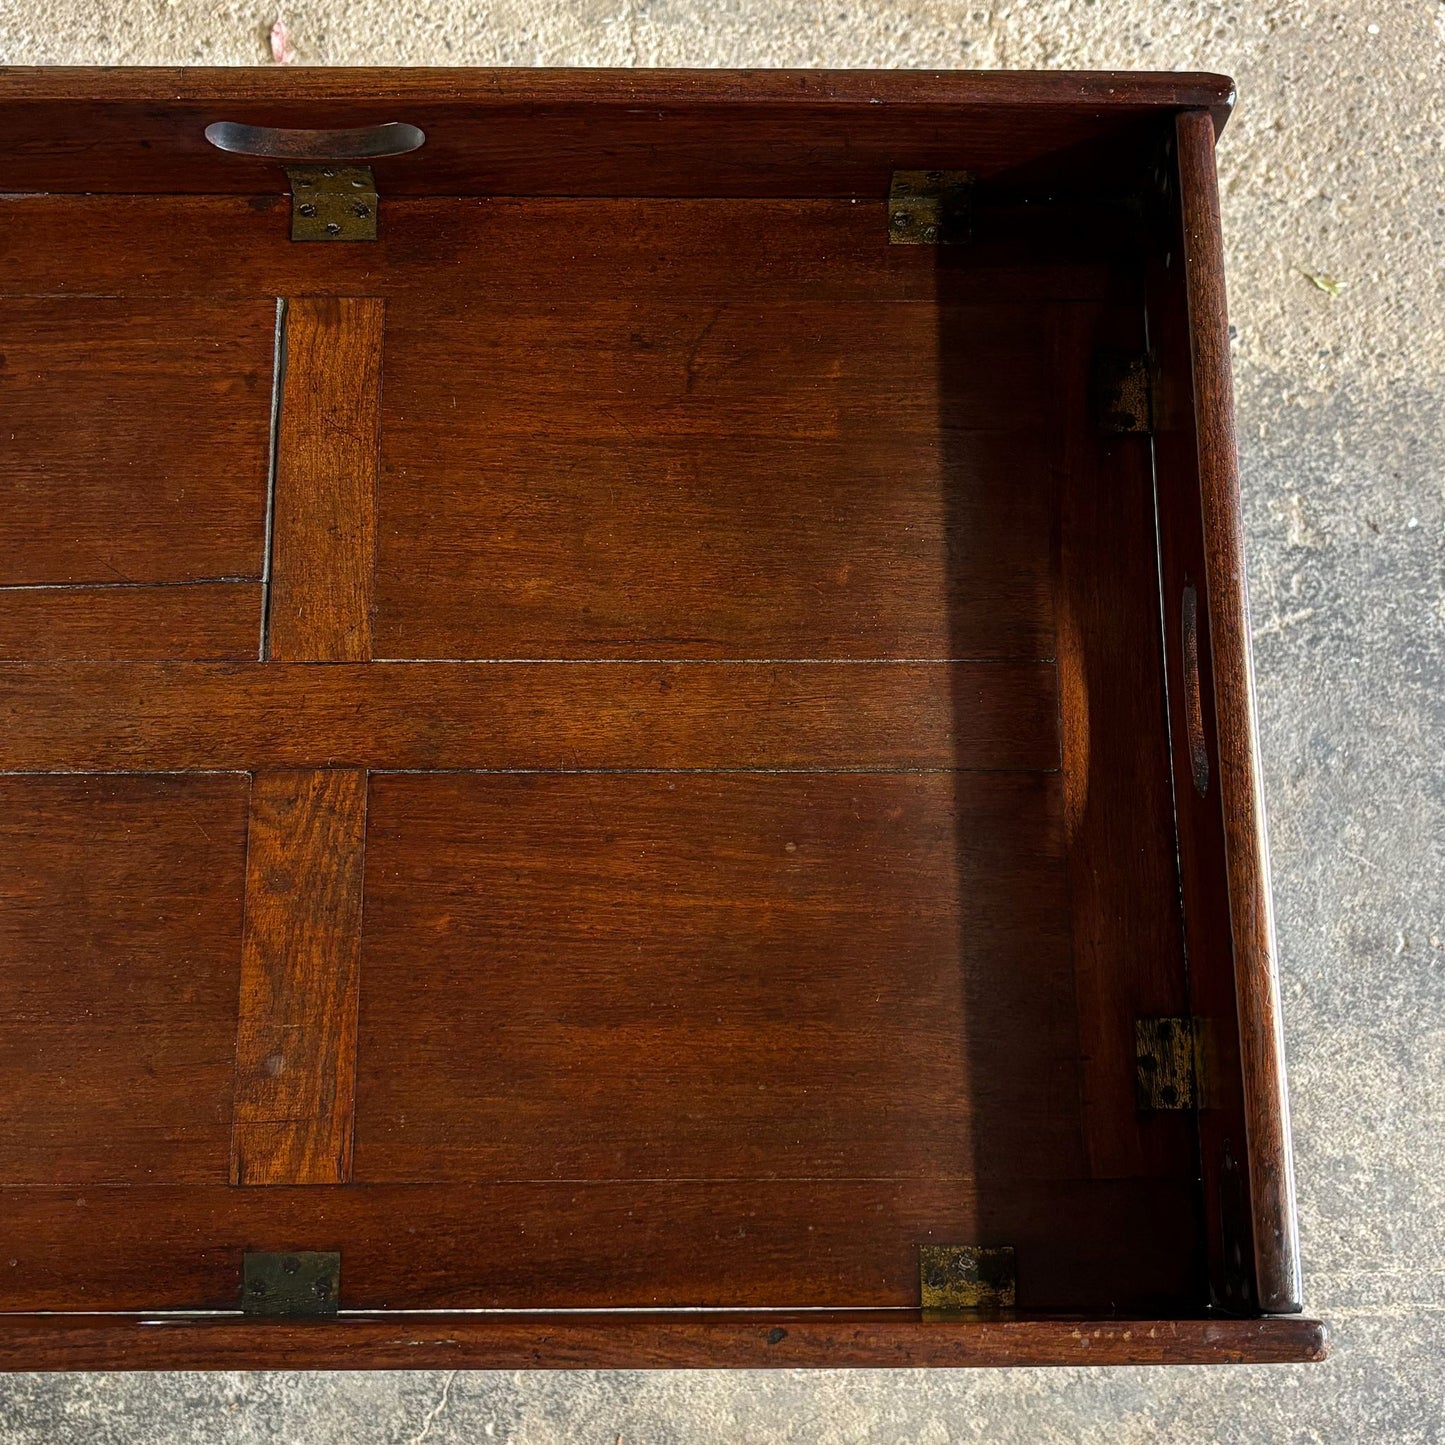 A generously sized mahogany butlers tray on stand, 19th century, the tray with four handles and hinged sides on a square section folding stand. In good and study condition.